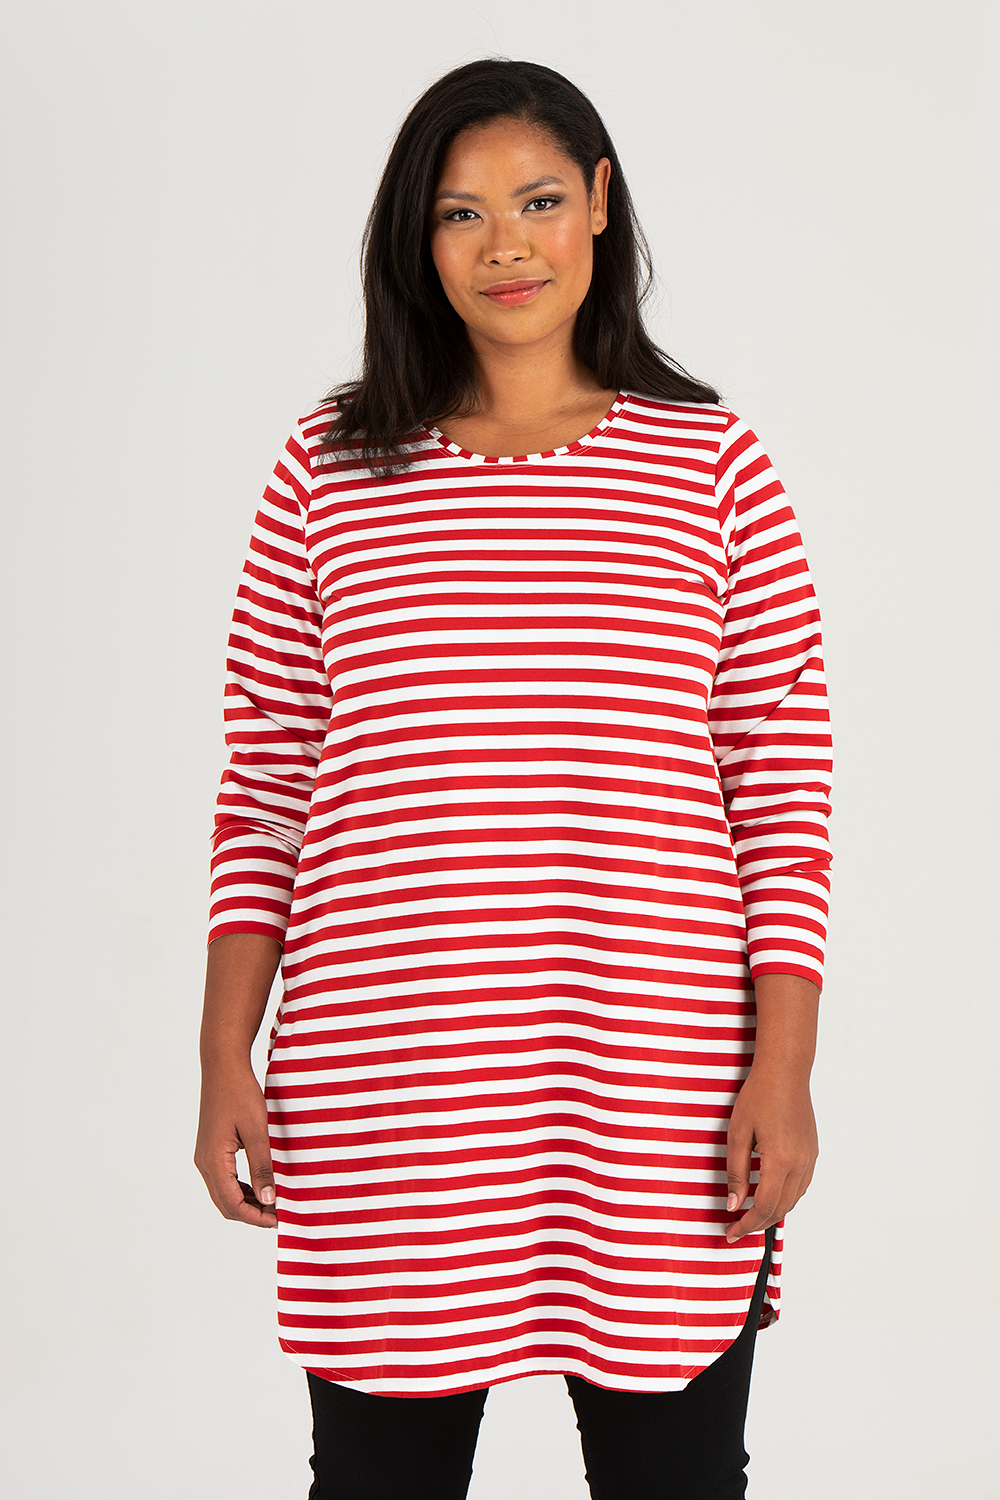 Kate tunic striped red/white